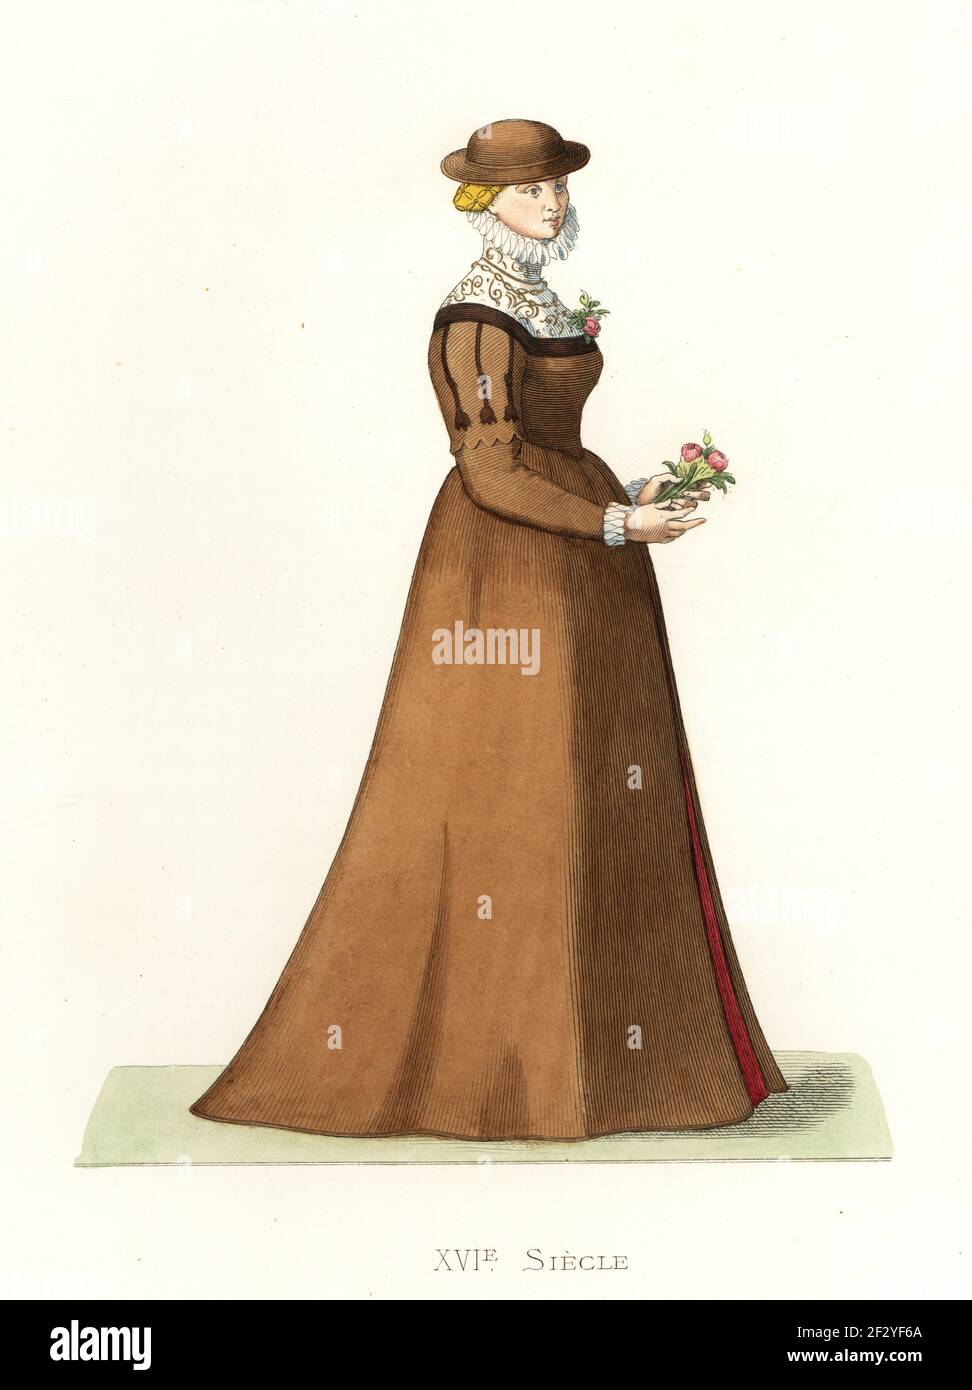 Young English woman, 16th century. In brown hat and wool gown lined with red silk, ruff collar and cuffs, wimple embroidered in gold. With a garland in her bodice. Angleterre, Jeune Fille. Handcolored lithograph after an illustration by Edmond Lechevallier-Chevignard from Georges Duplessis's Costumes historiques des XVIe, XVIIe et XVIIIe siecles (Historical costumes of the 16th, 17th and 18th centuries), Paris, 1867. Edmond Lechevallier-Chevignard was an artist, book illustrator, and interior designer. Stock Photo